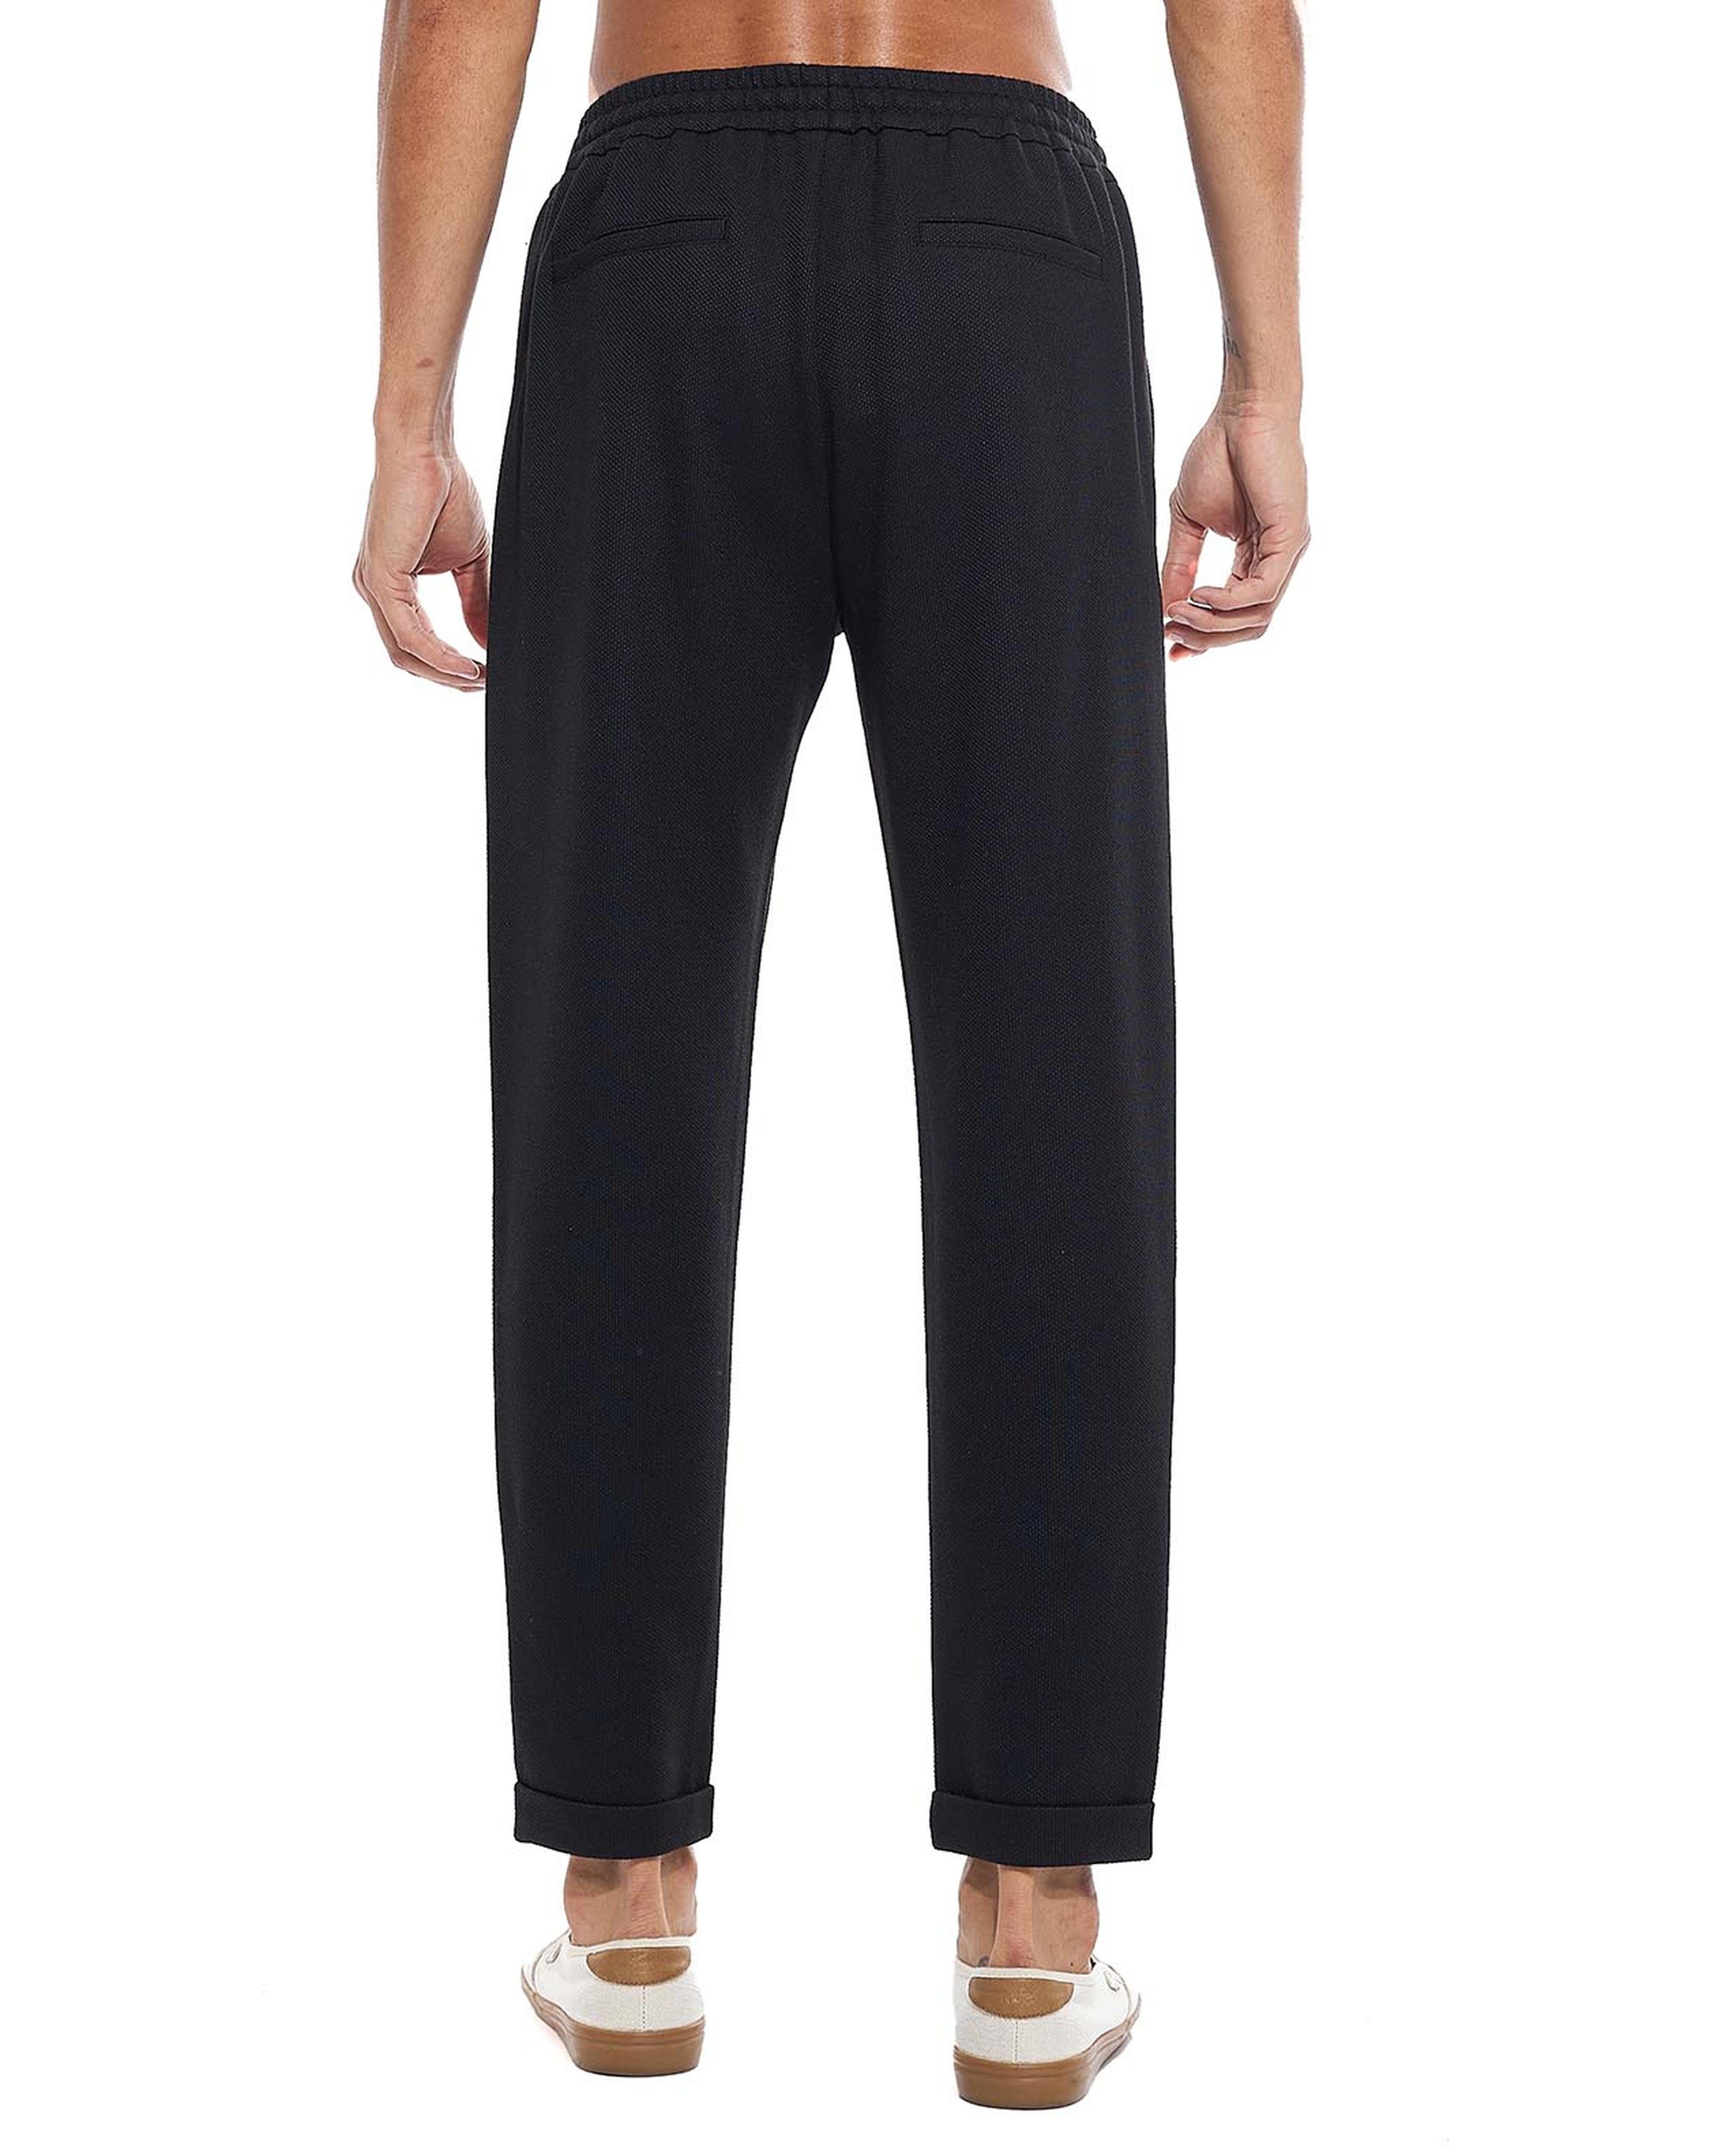 Textured Pants with Drawstring Waist